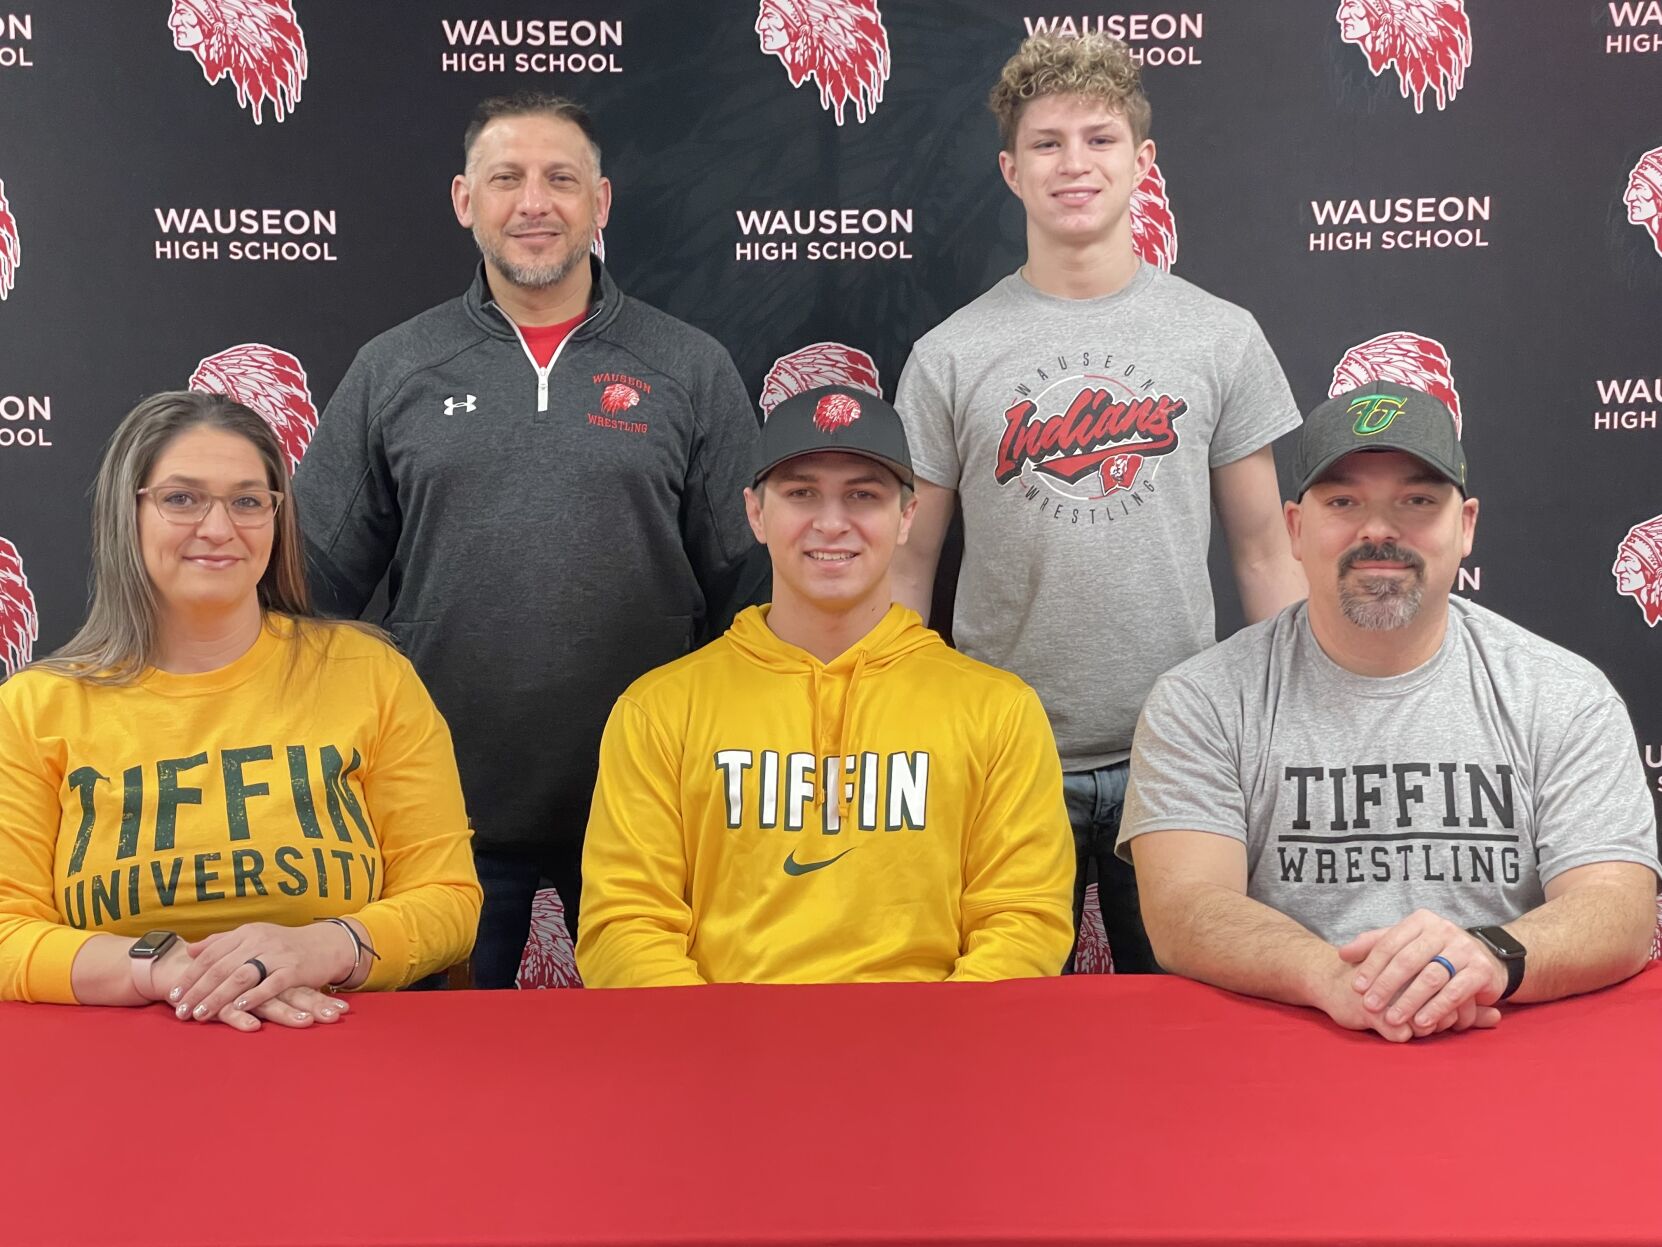 Wauseon's Twigg to wrestle for Tiffin | Local Sports | crescent